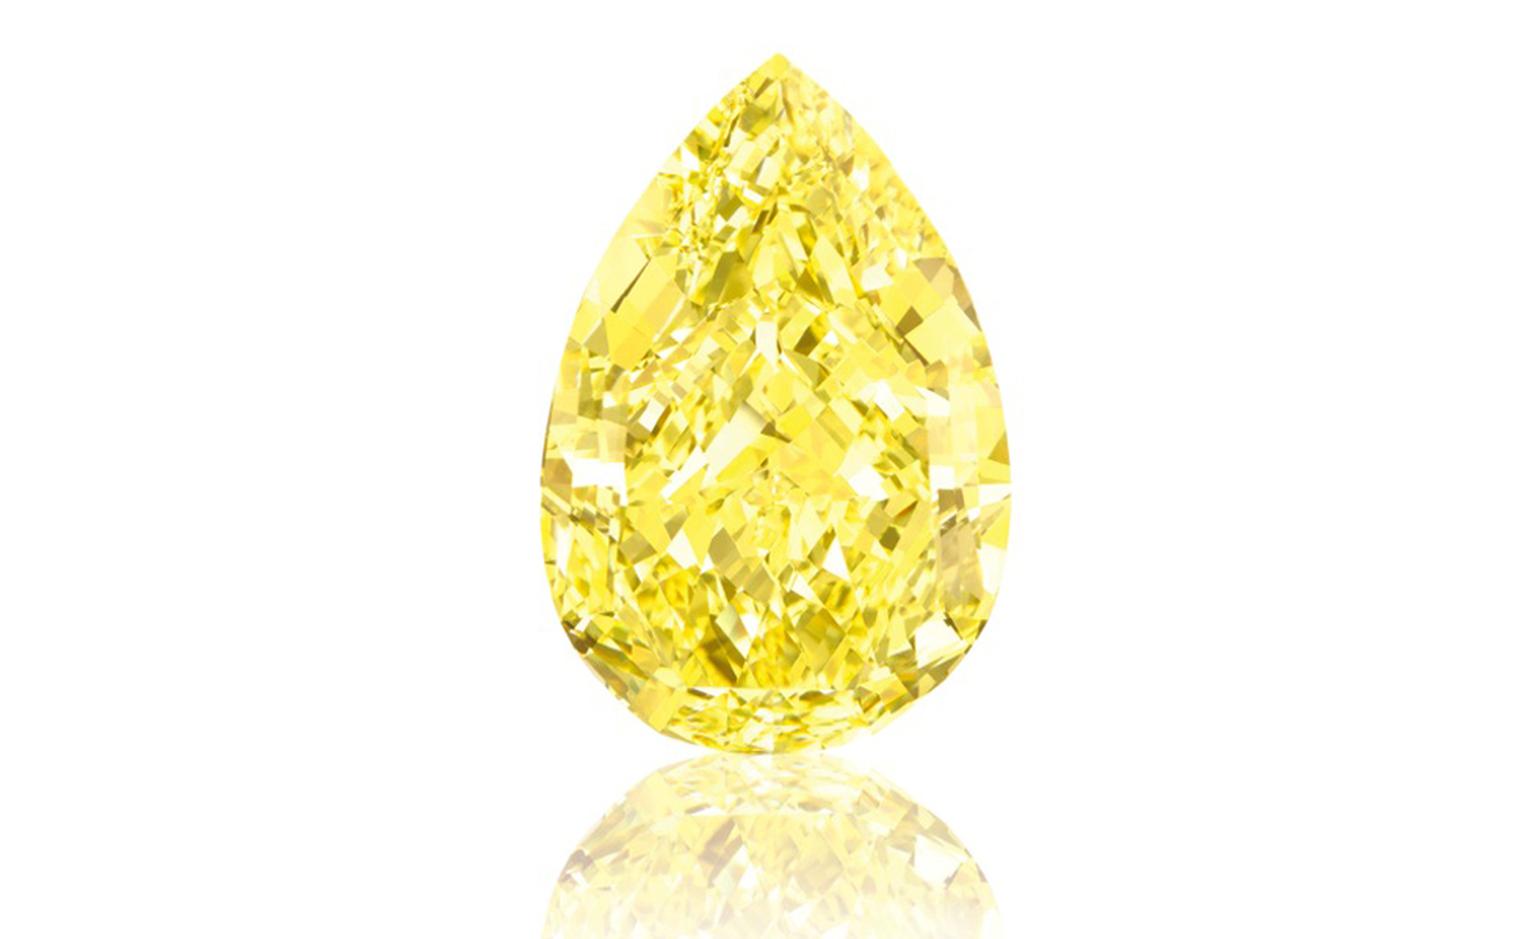 The Sun-Drop Diamond. 110.03 Carats. Graded Fancy Vivid Yellow, the highest colour grading for a yellow diamond, by the Gemological Institute of America (GIA). Estimate: $11-15 million